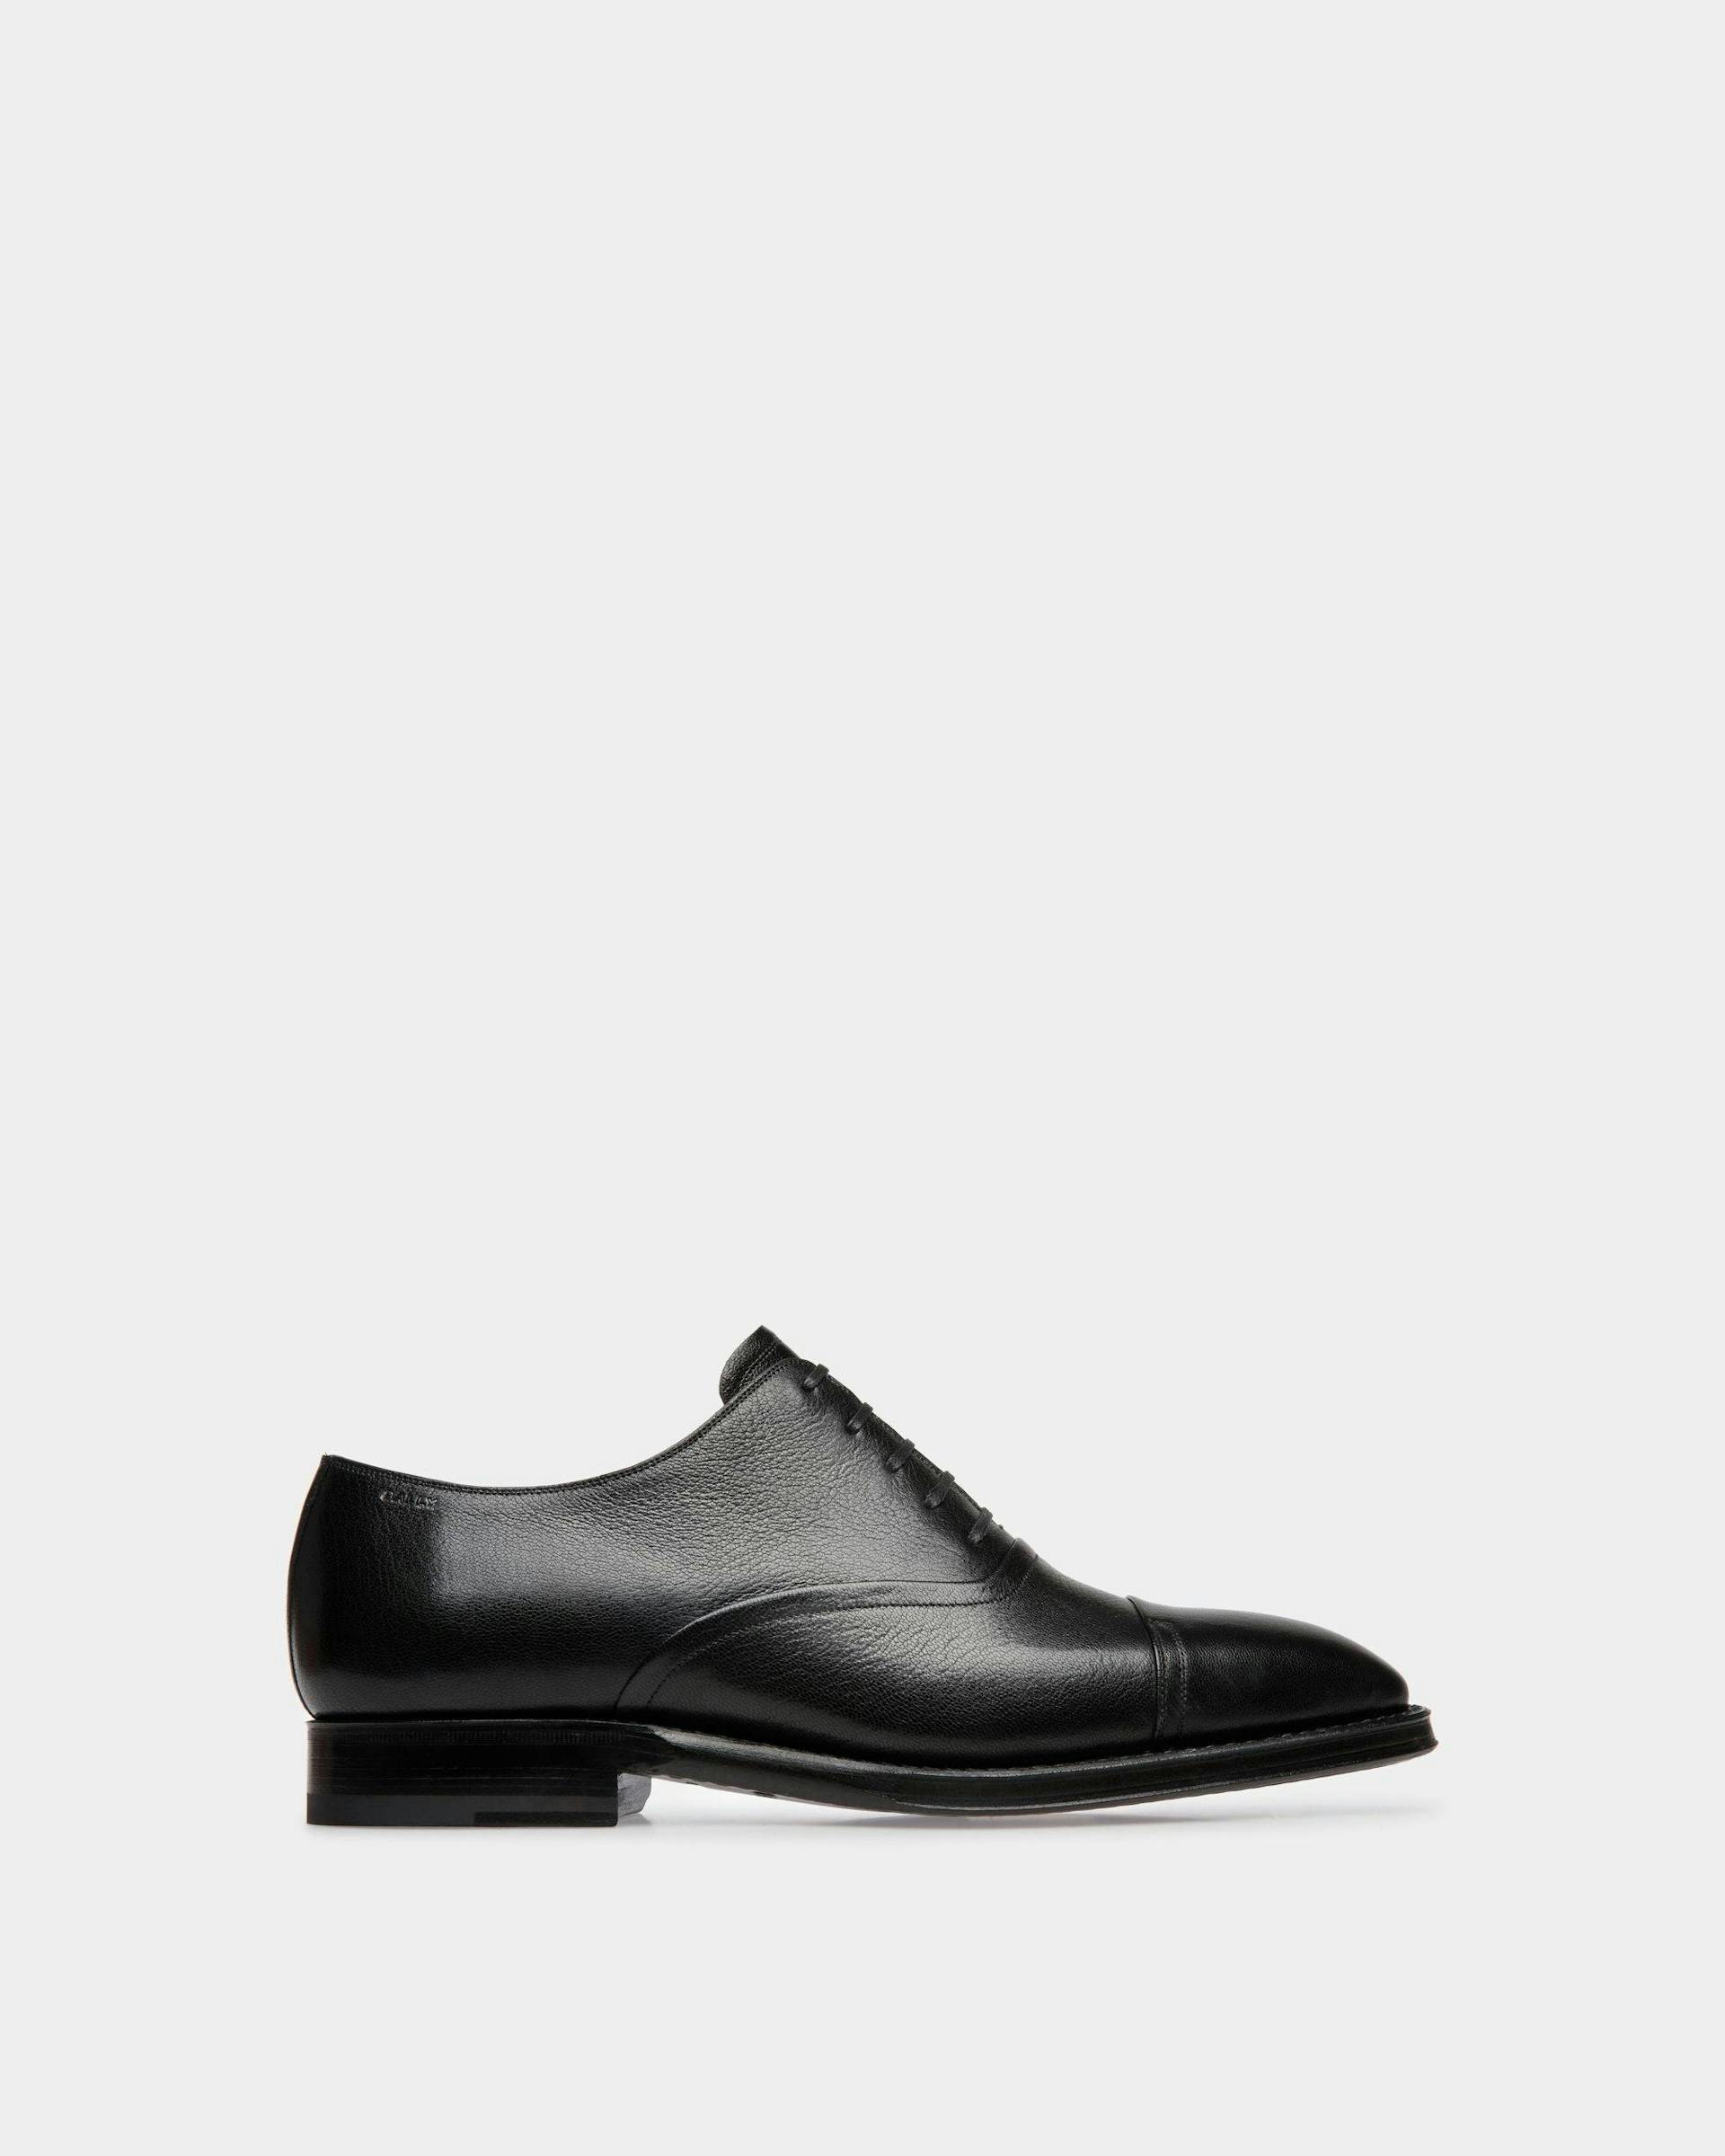 Men's Scribe Oxford in Black Grained Leather | Bally | Still Life Side